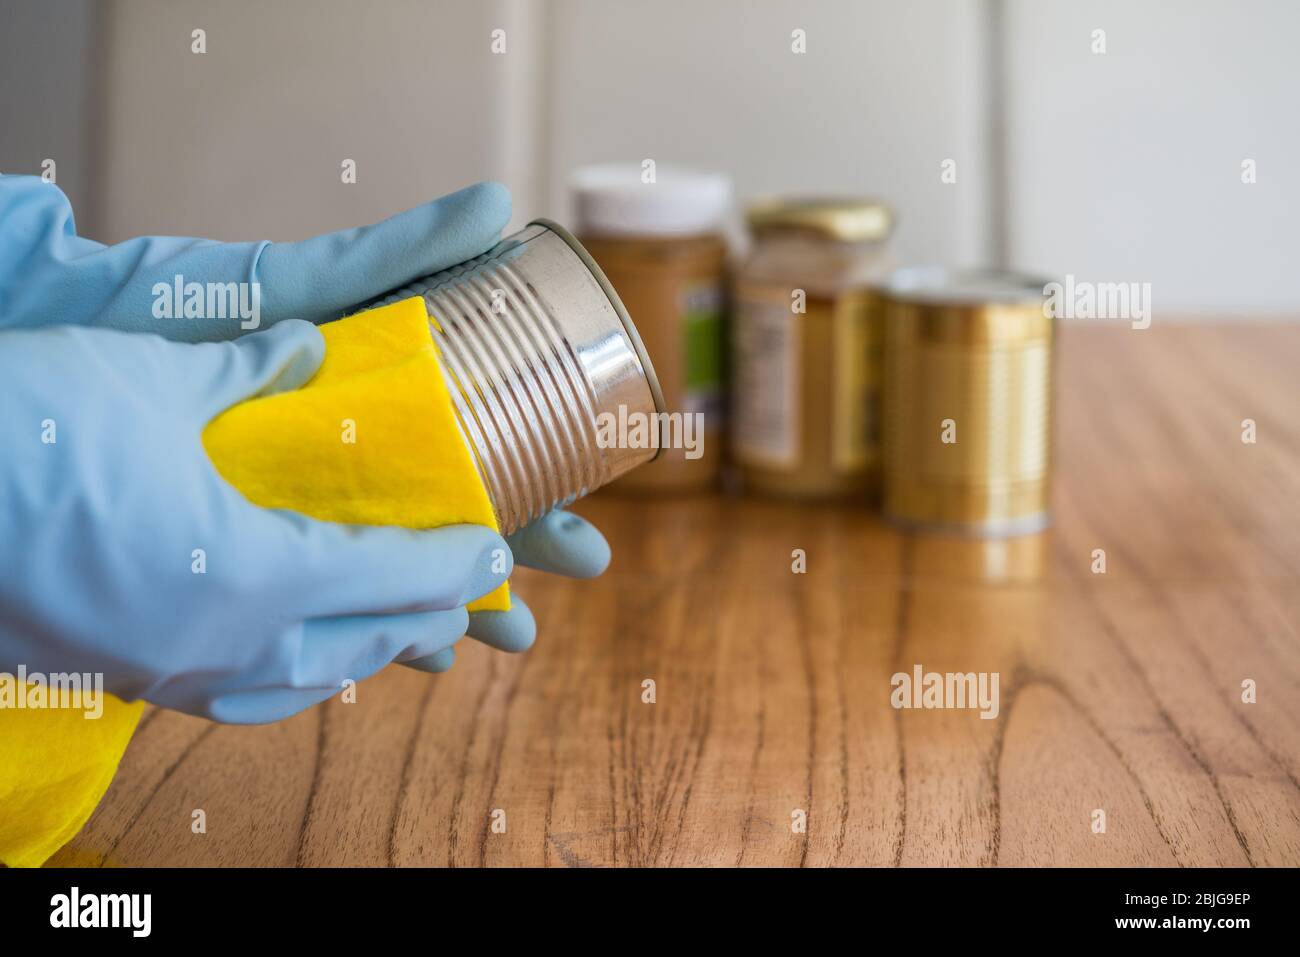 Disinfecting food with rubbing alcohol for prevention of coronavirus covid-19. Stock Photo